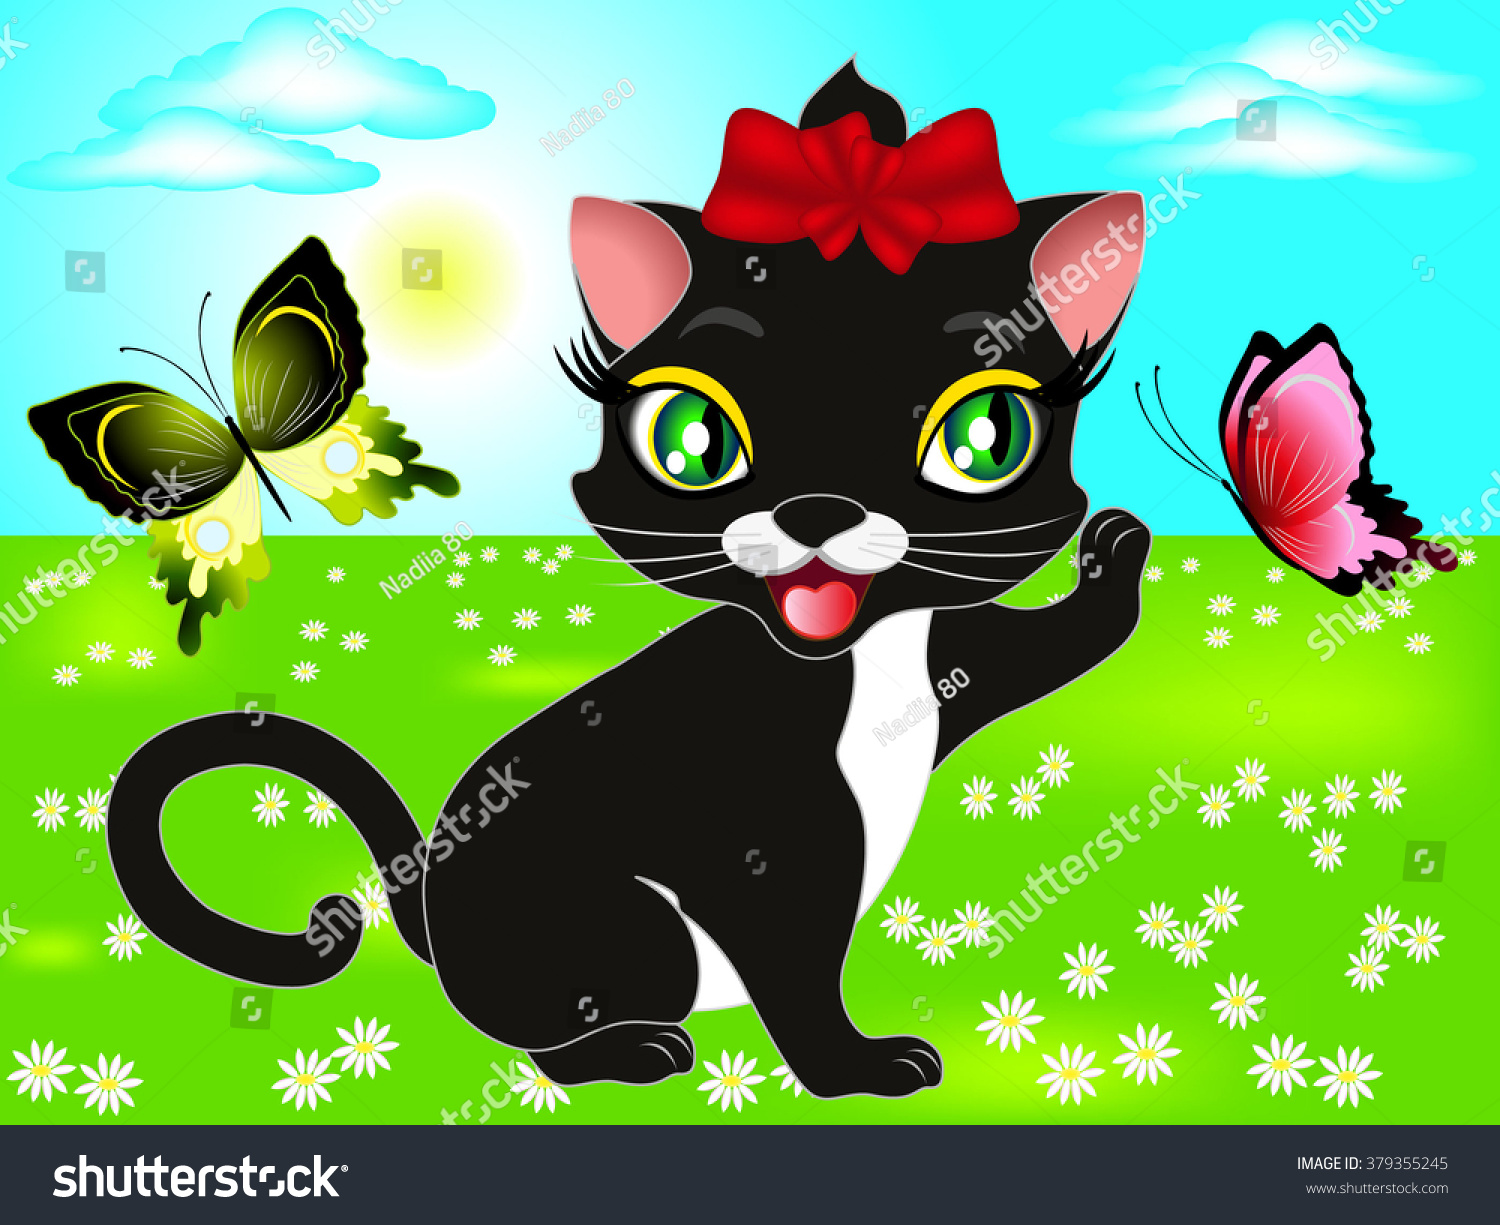 SVG of Kitten playing with butterflies in the meadow. svg